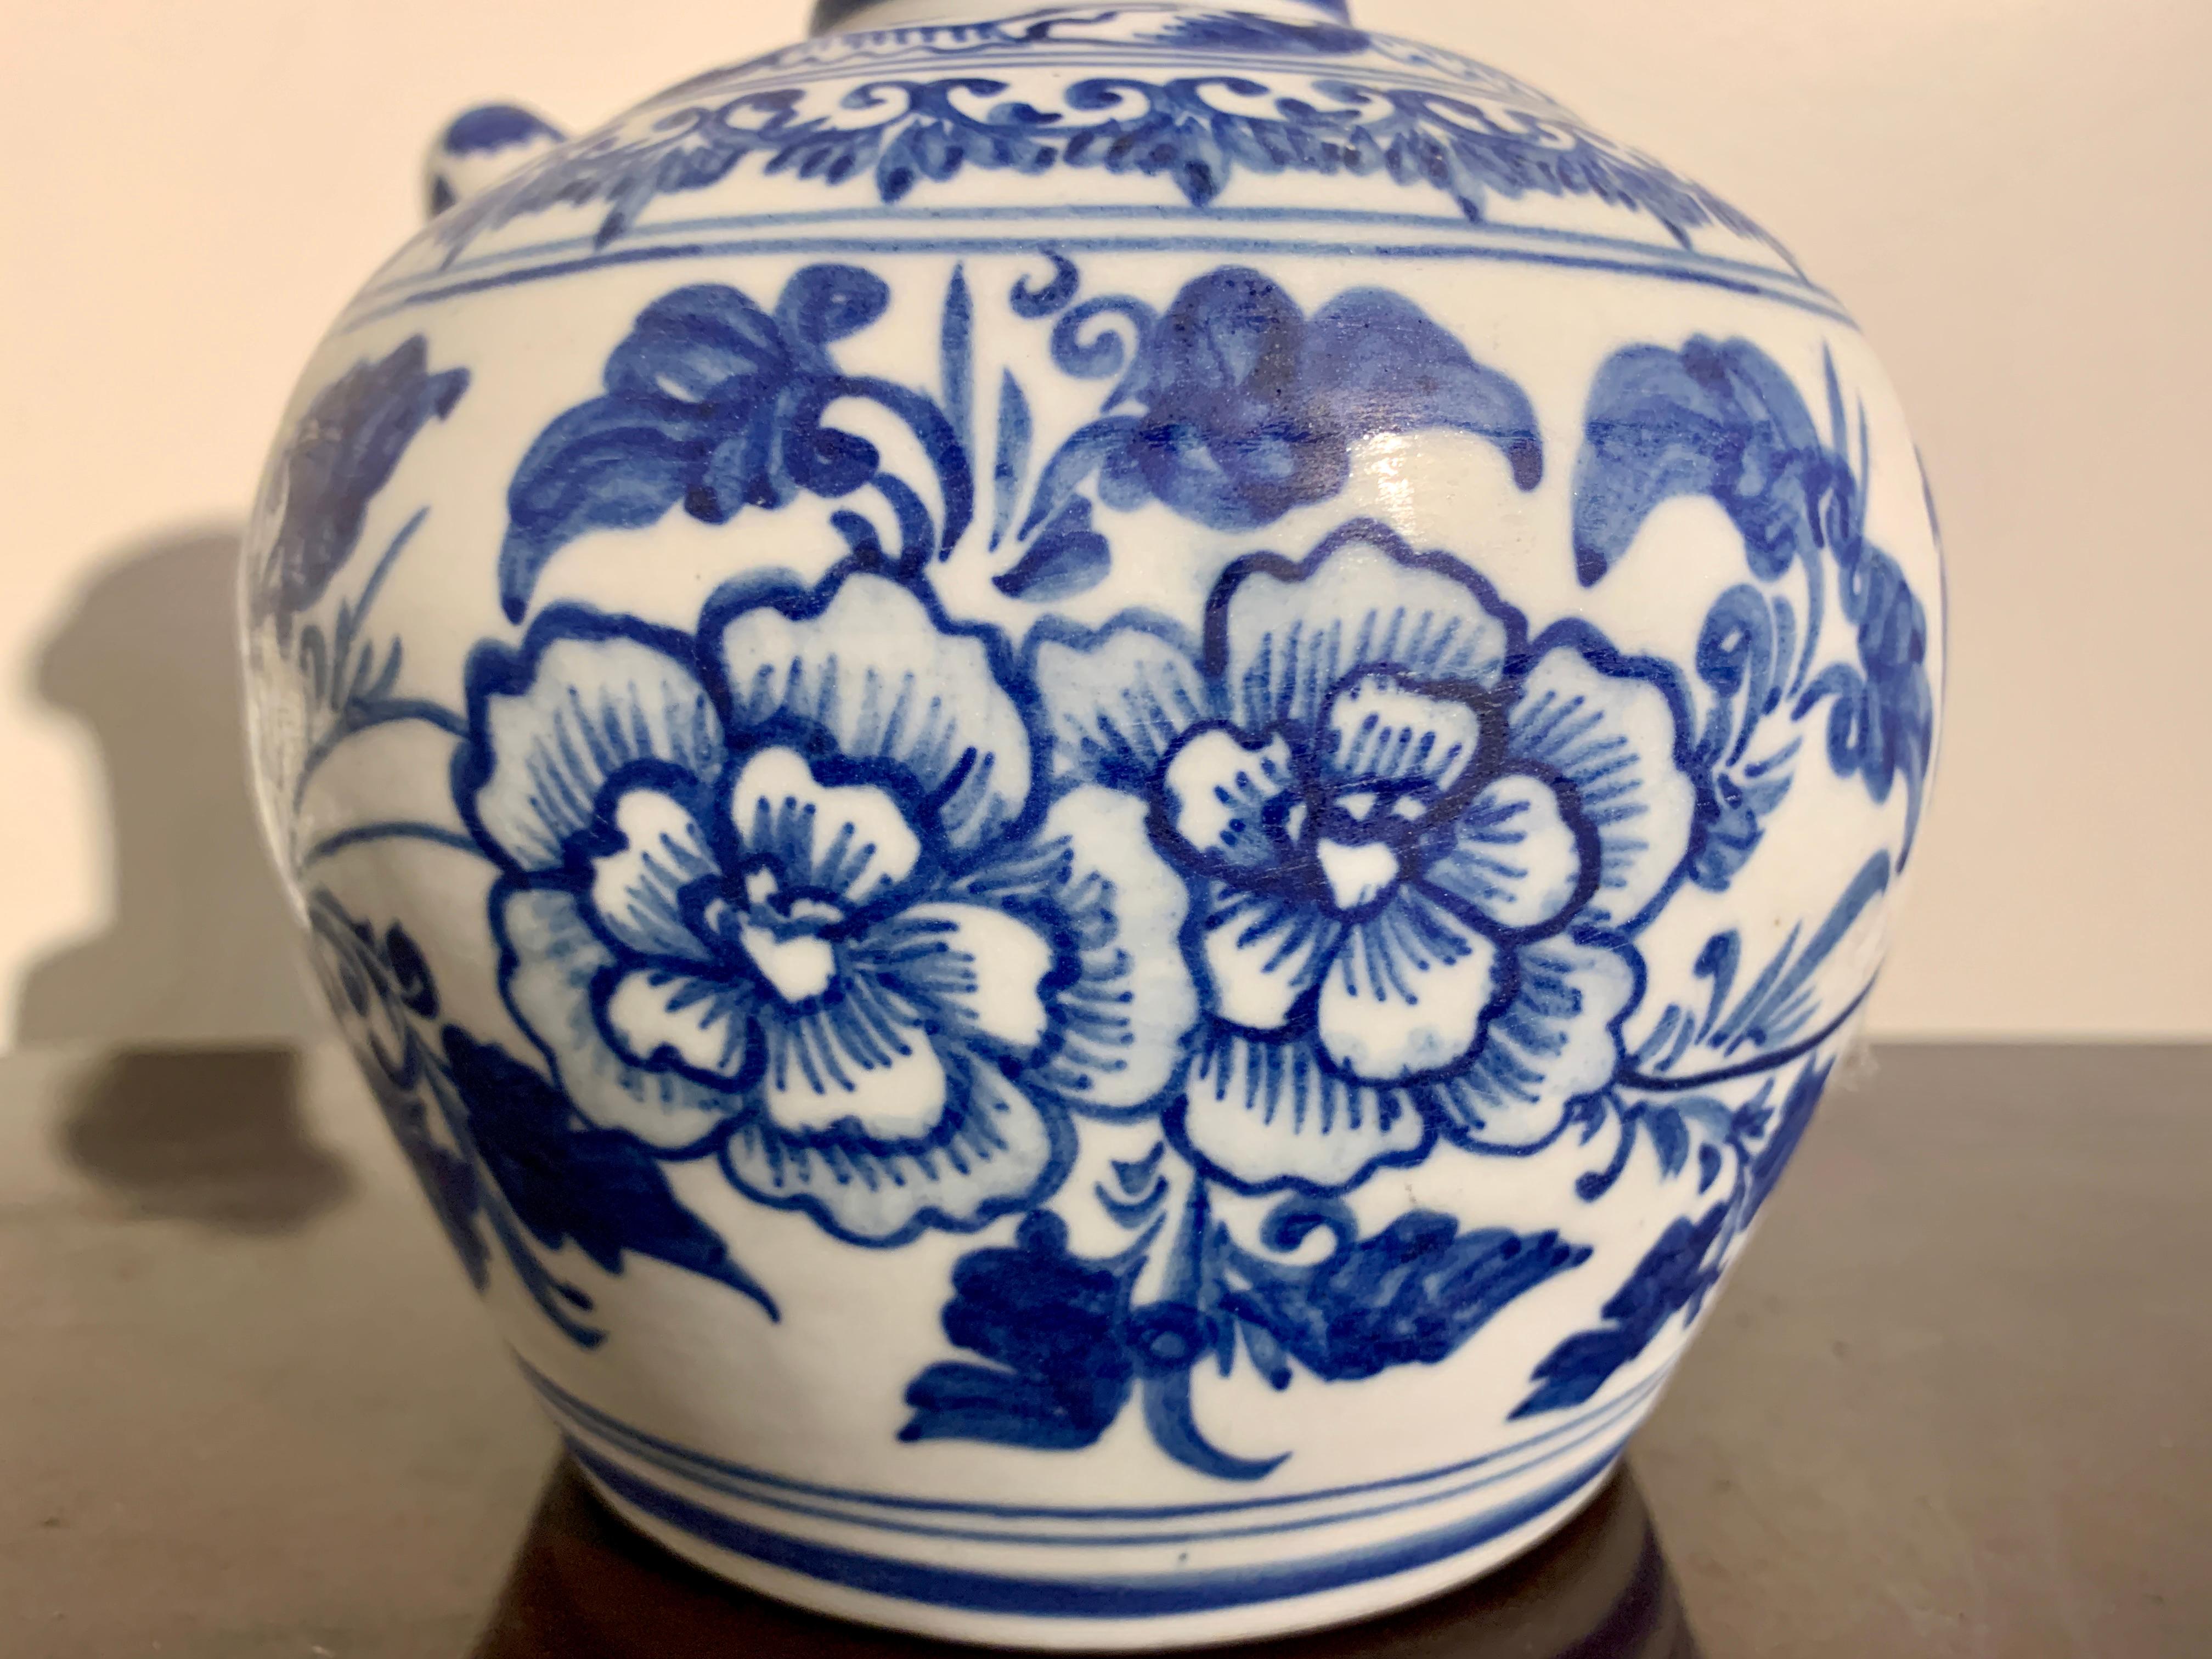 Qing Chinese Blue and White Porcelain Kendi, Transitional Period, 17th Century, China For Sale